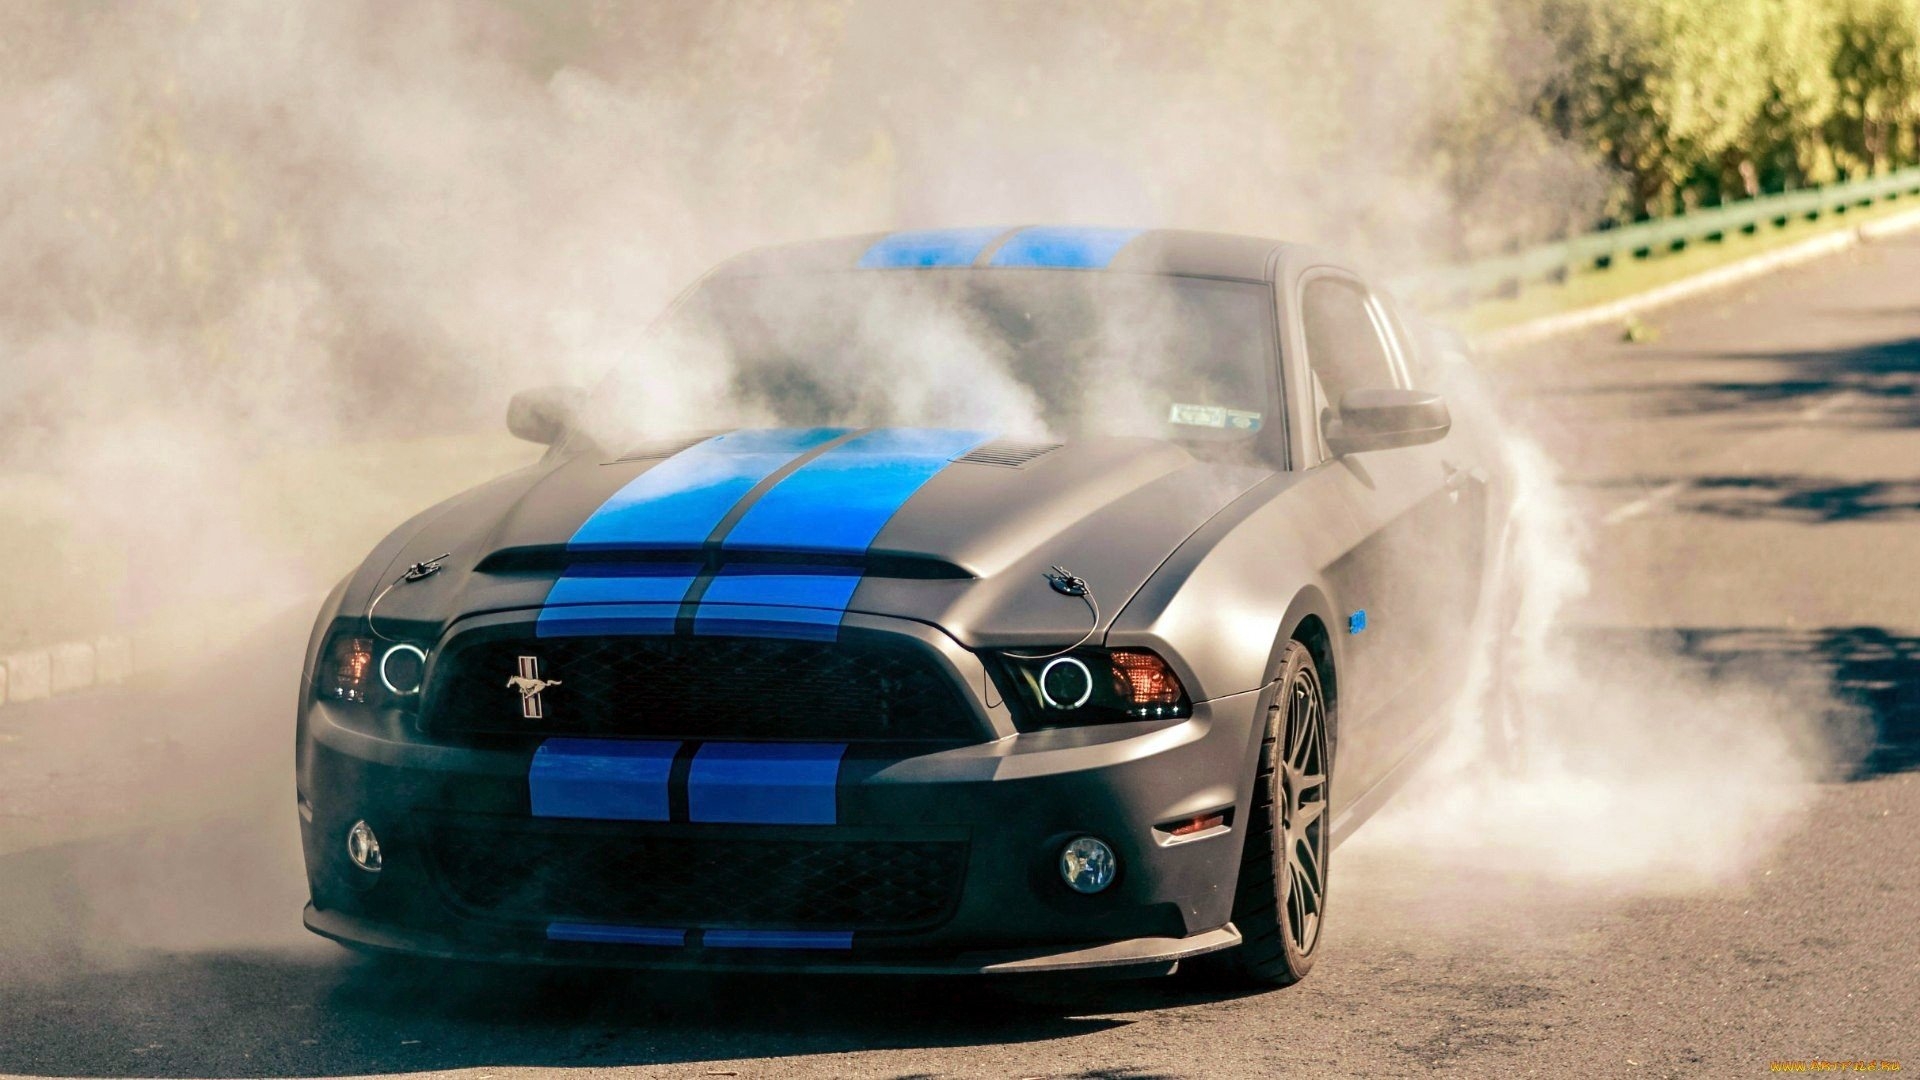 Ford Mustang Shelby Gt500, Burnout, Front View, Muscle, - Super Snake  Mustang Burnout - 1920x1080 Wallpaper 